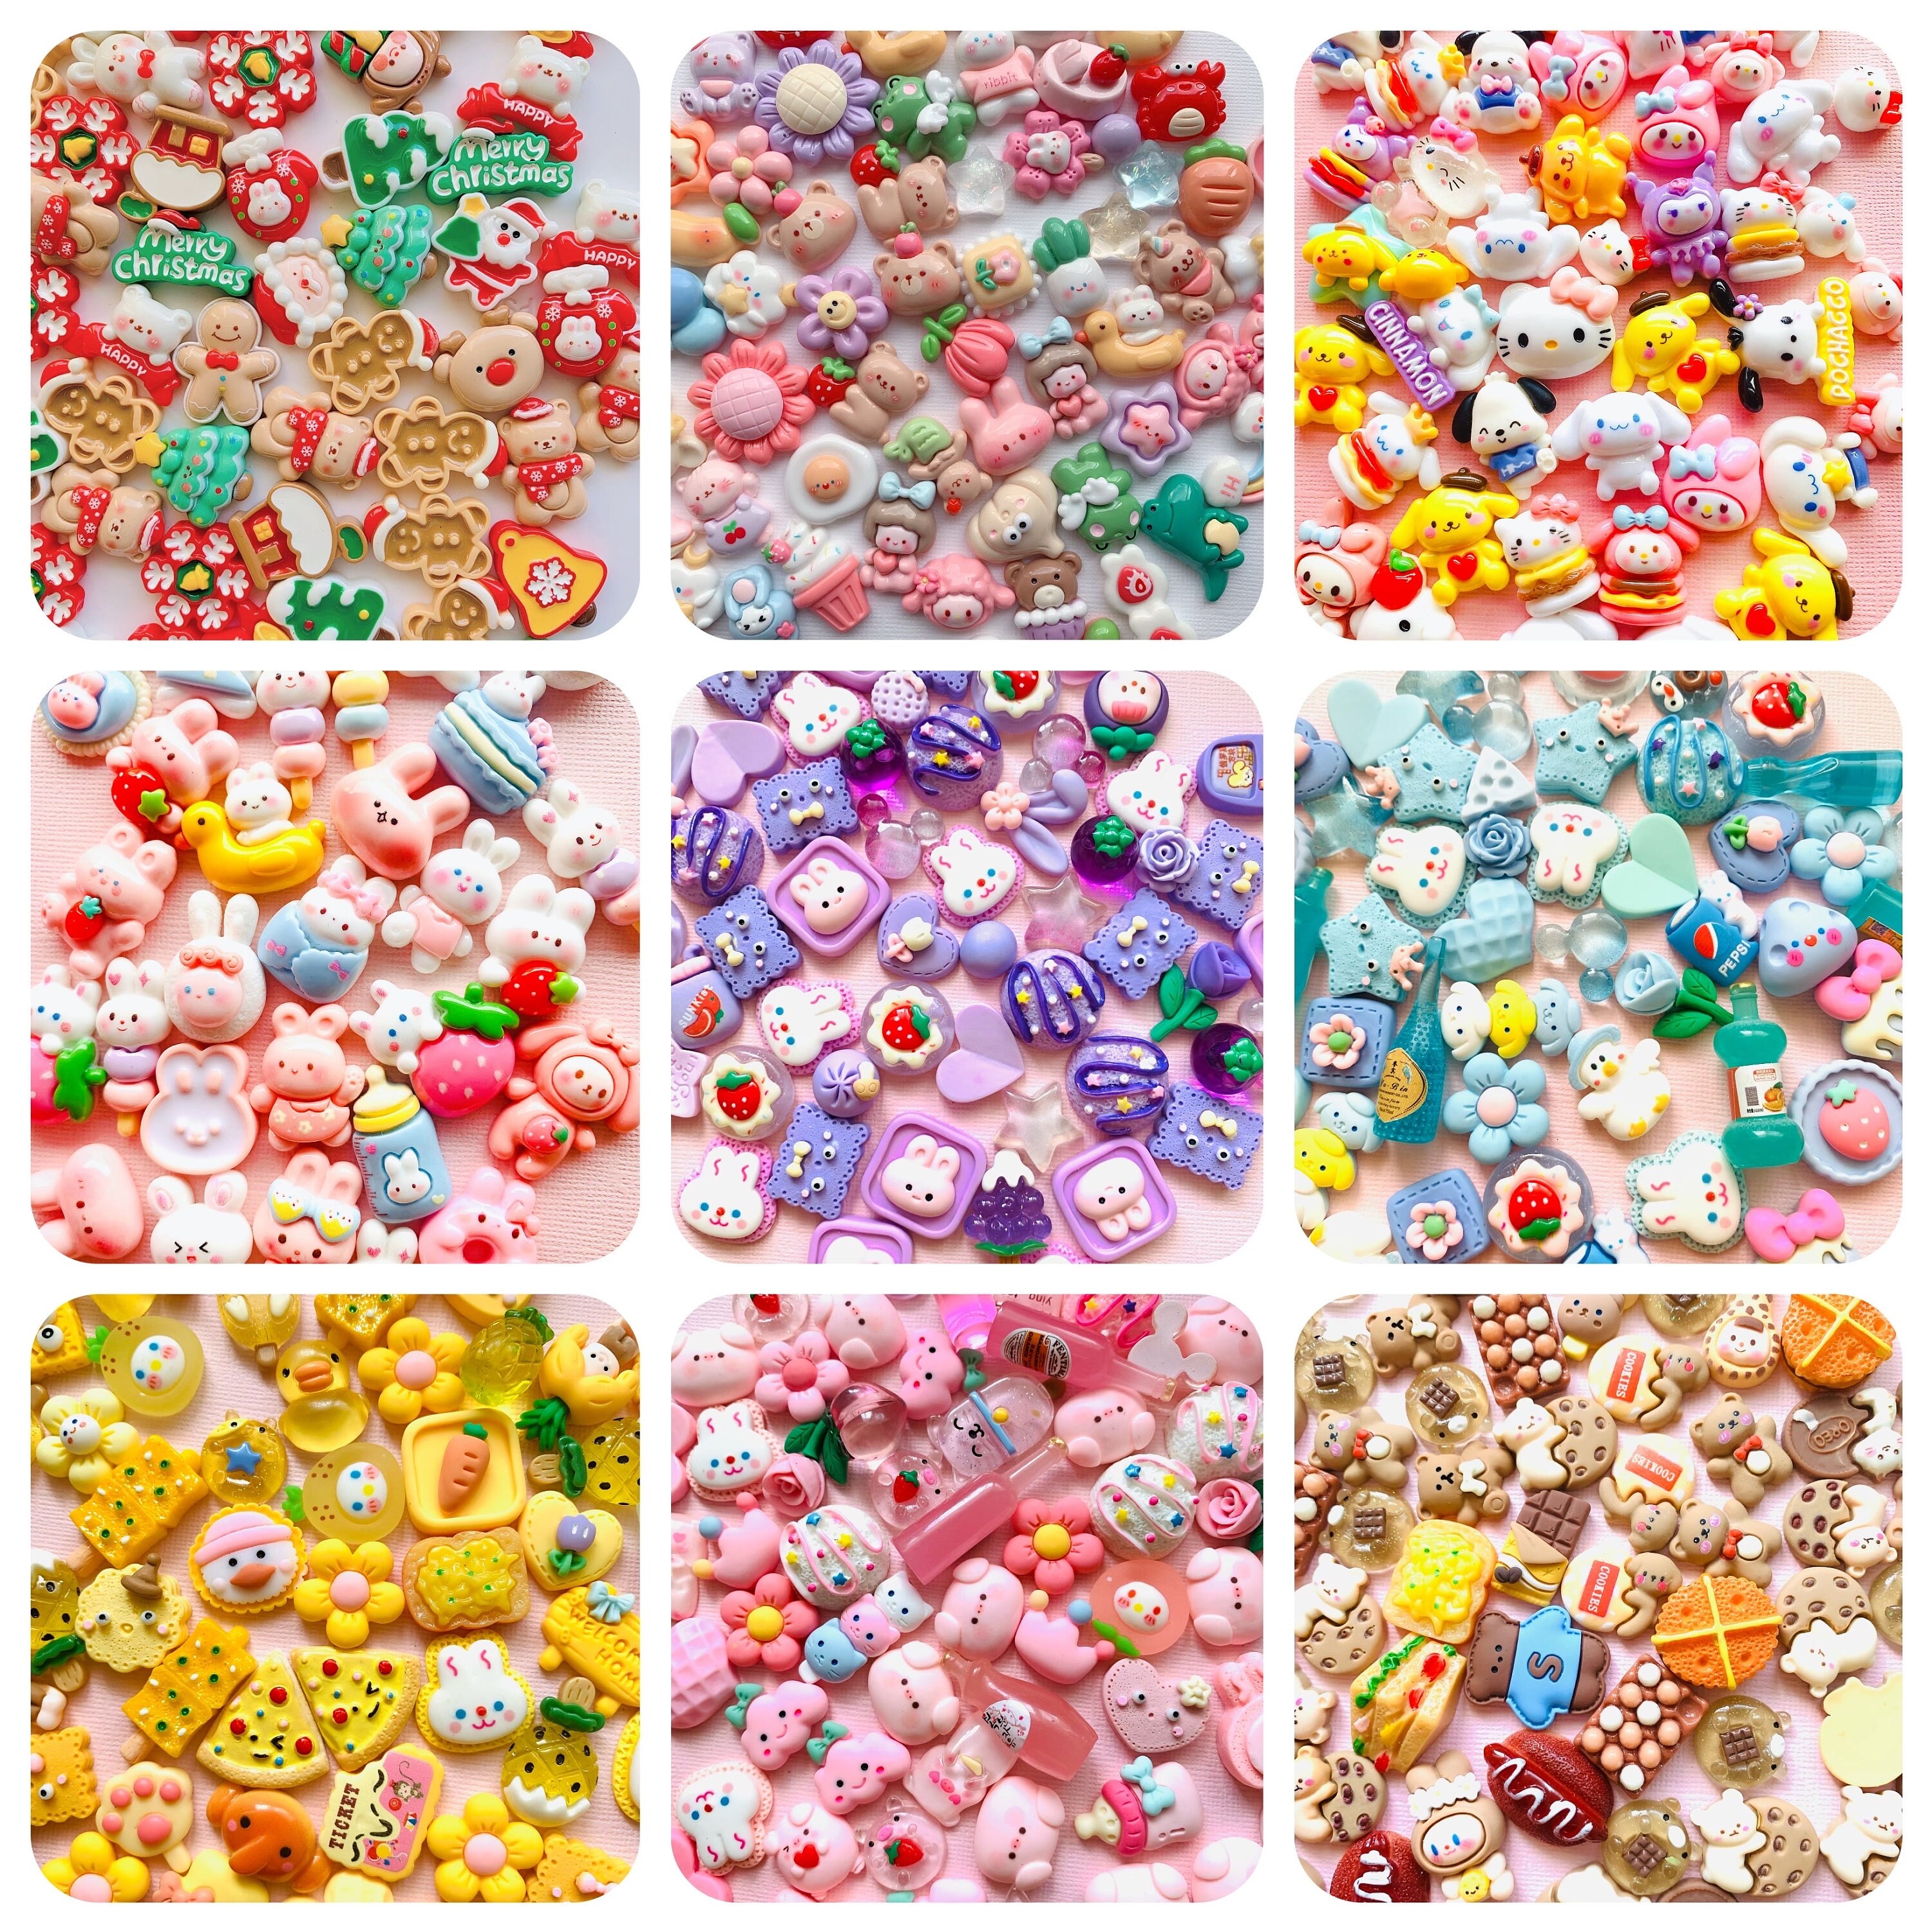 BULK Super Kawaii Pink Pastel Charms for Slime, Mixed Cute Resin Cabochons  for Crafts, Pink Kawaii Fake Food Deco Resin Cabochons Mixed